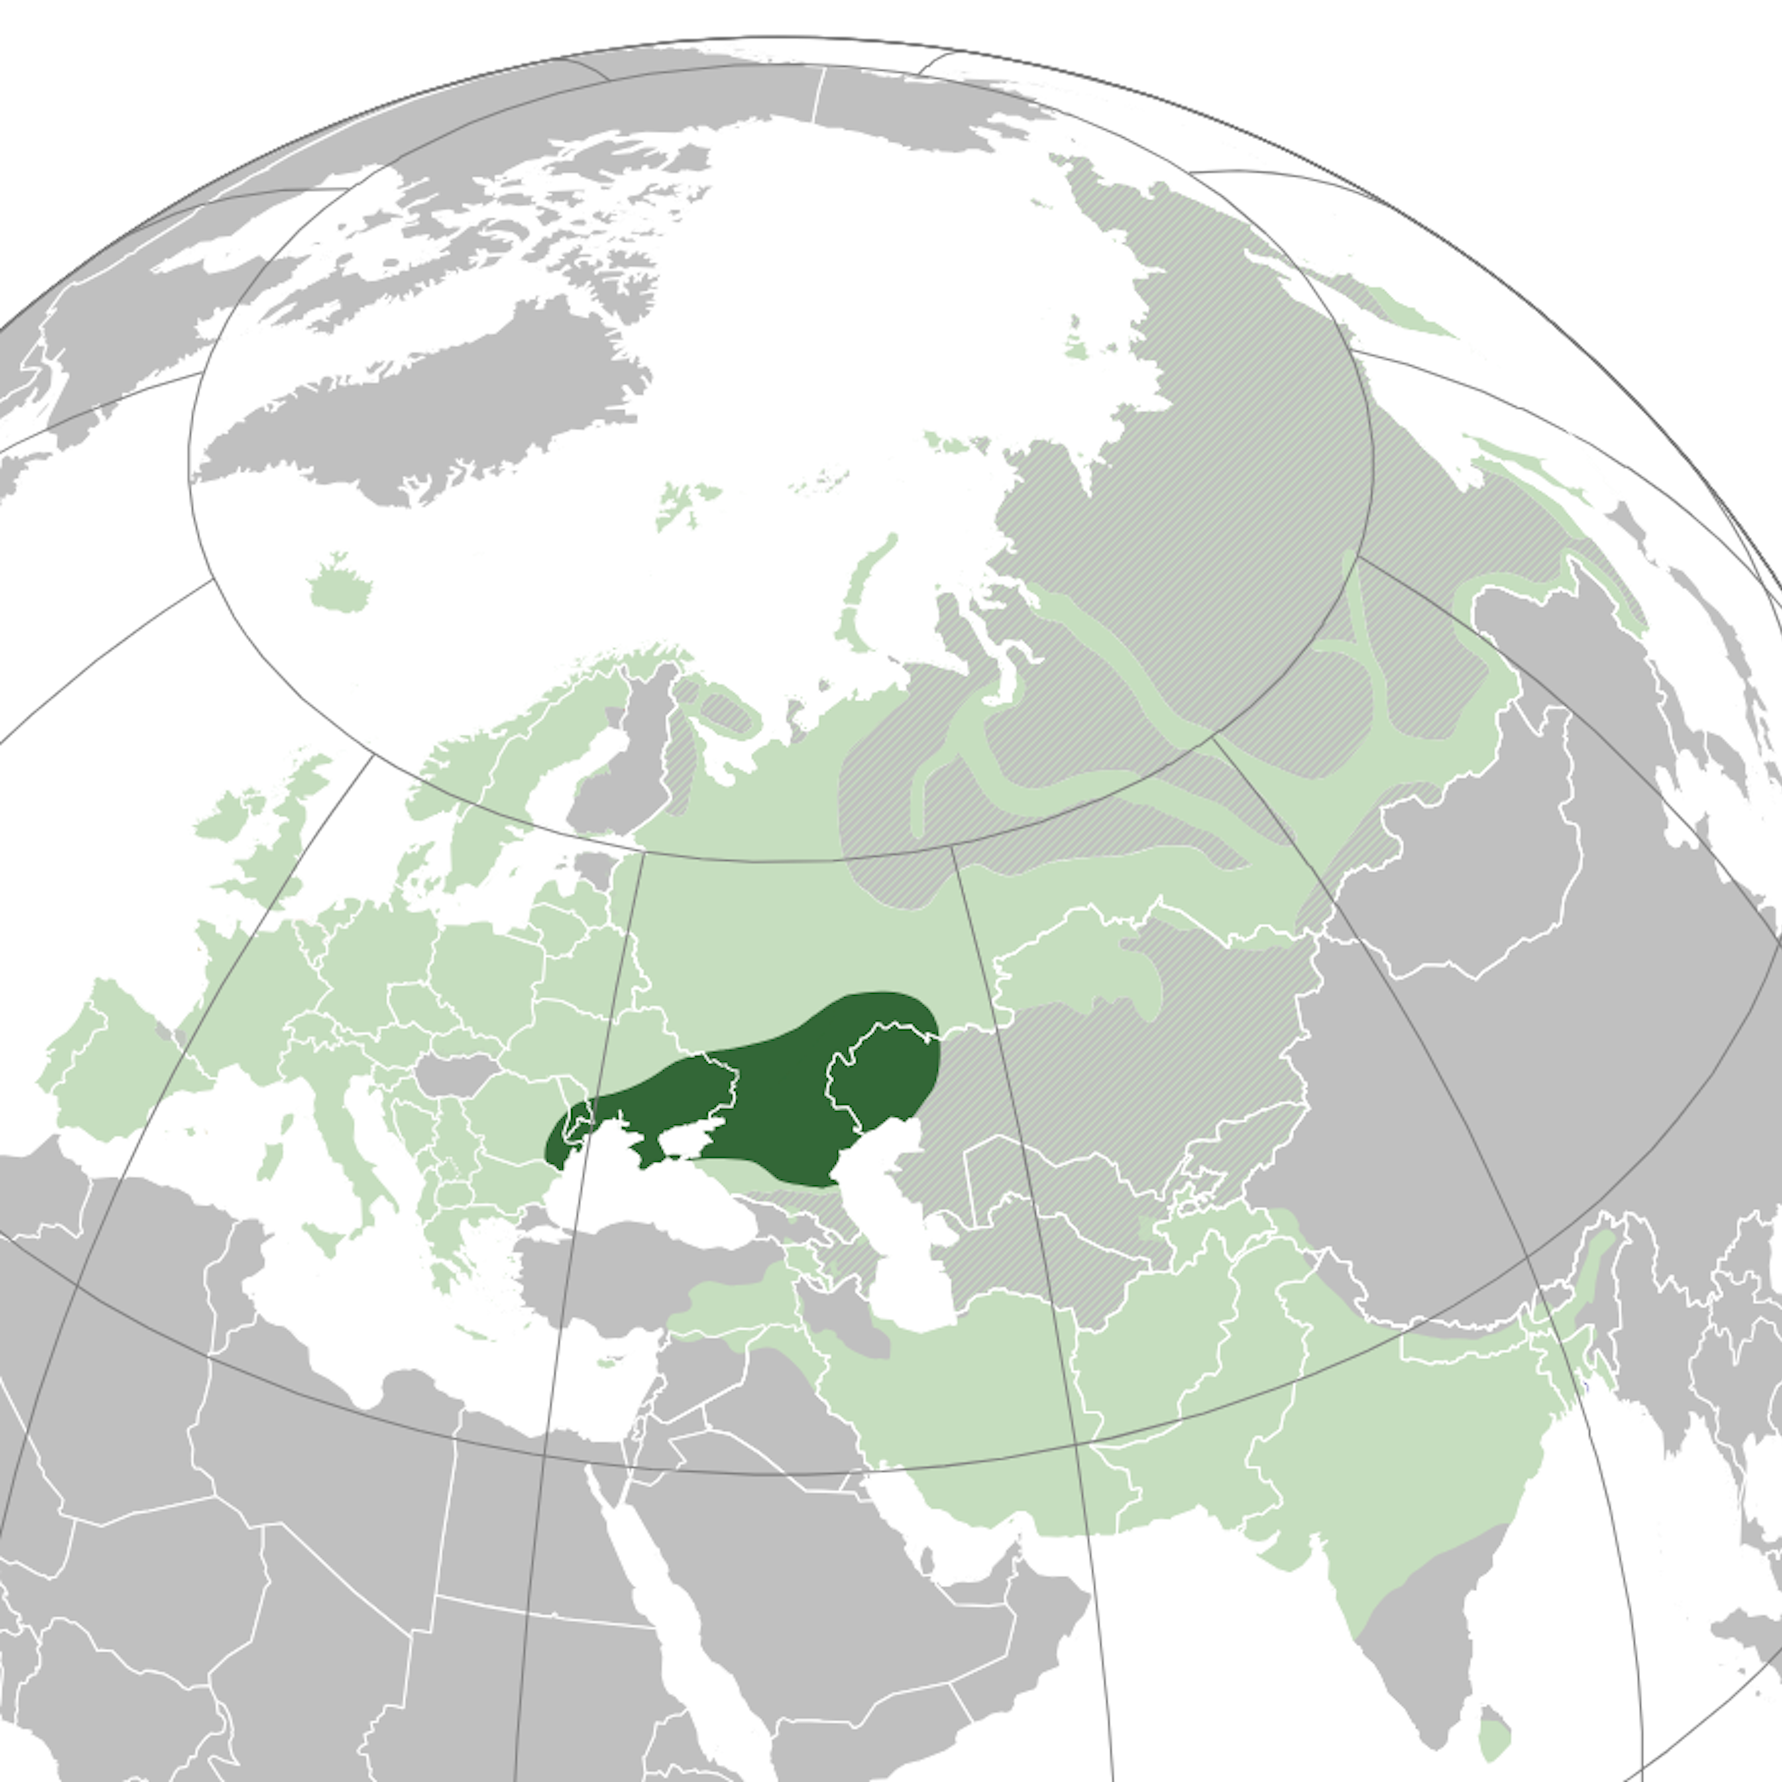 A map of europe with a green area in the middle.